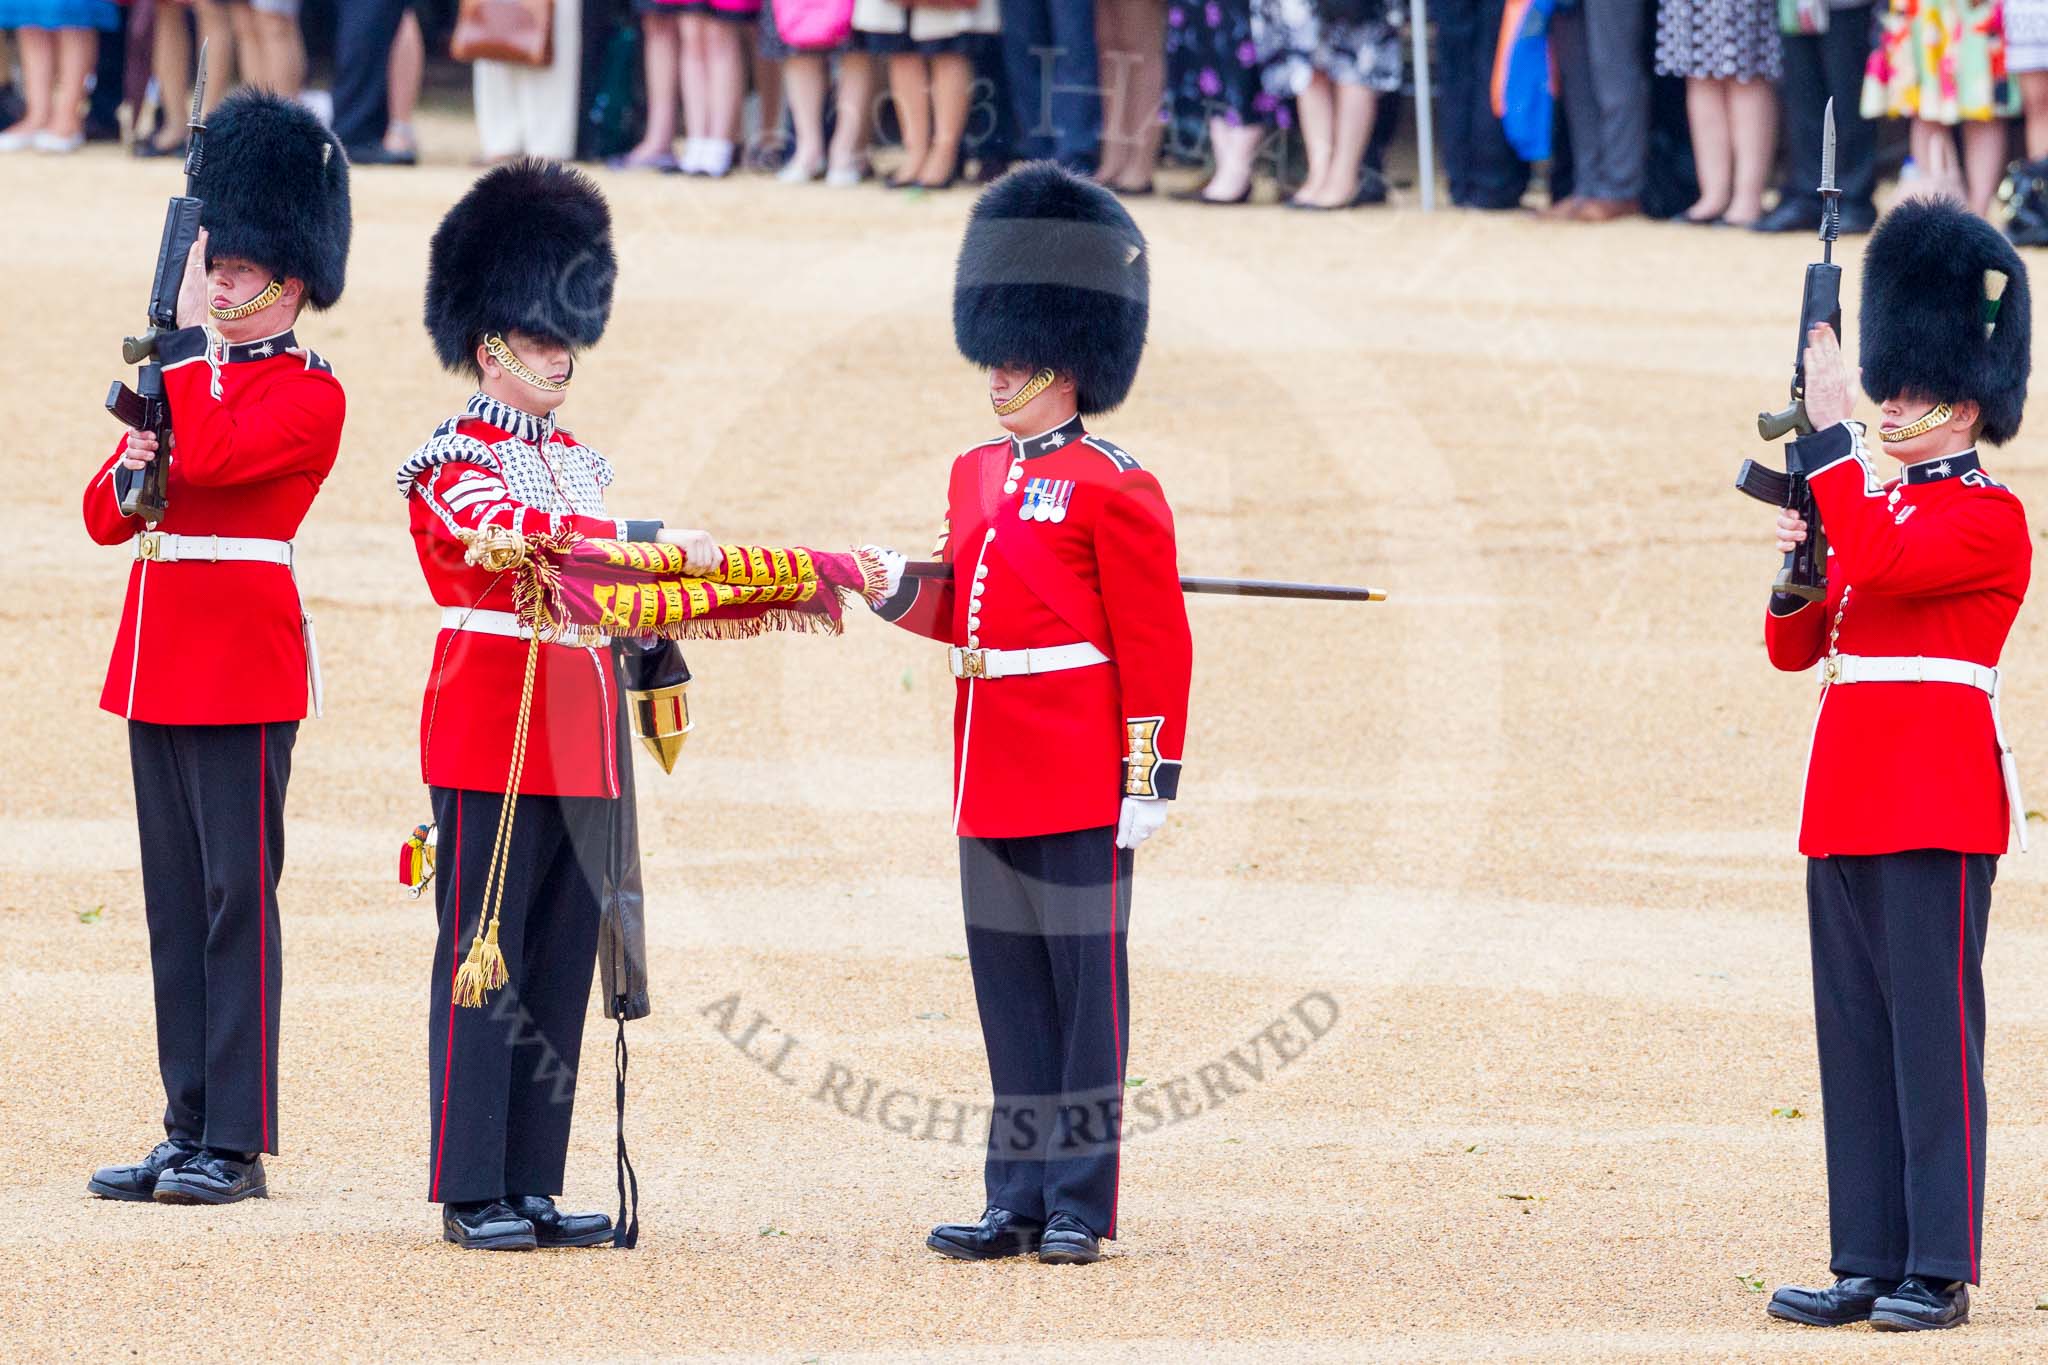 Trooping the Colour 2015. Image #138, 13 June 2015 10:36 Horse Guards Parade, London, UK